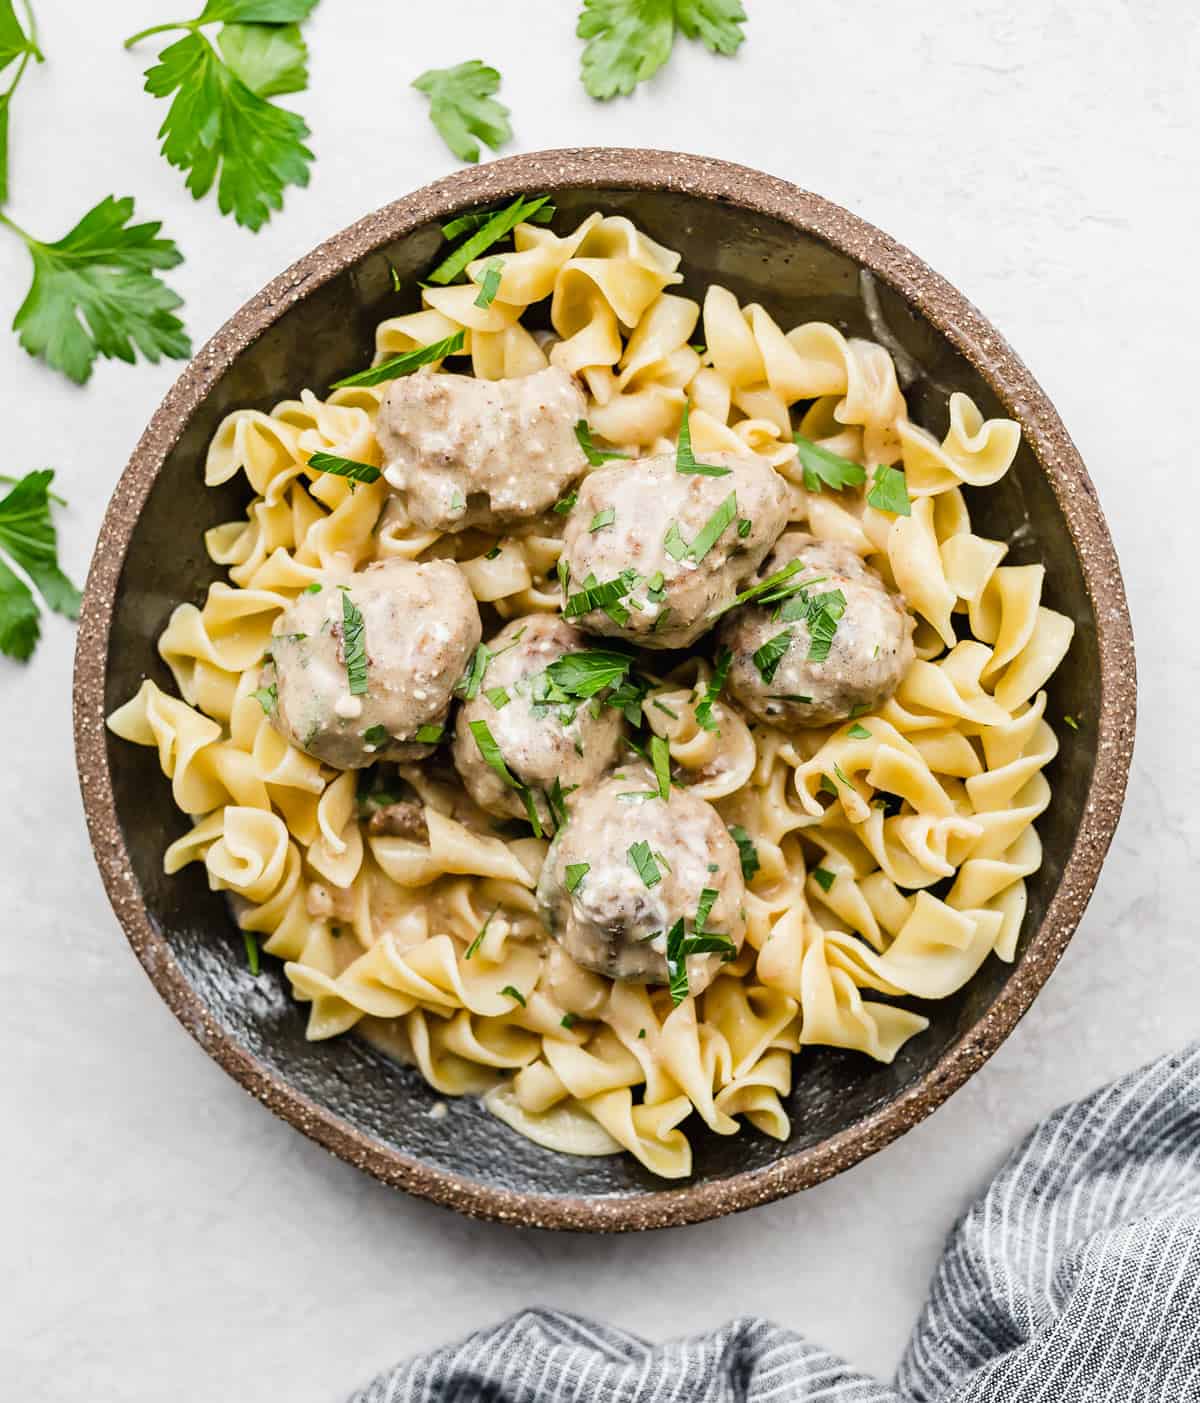 Swedish Meatballs on a bed of cooked egg noodles in a black plate.